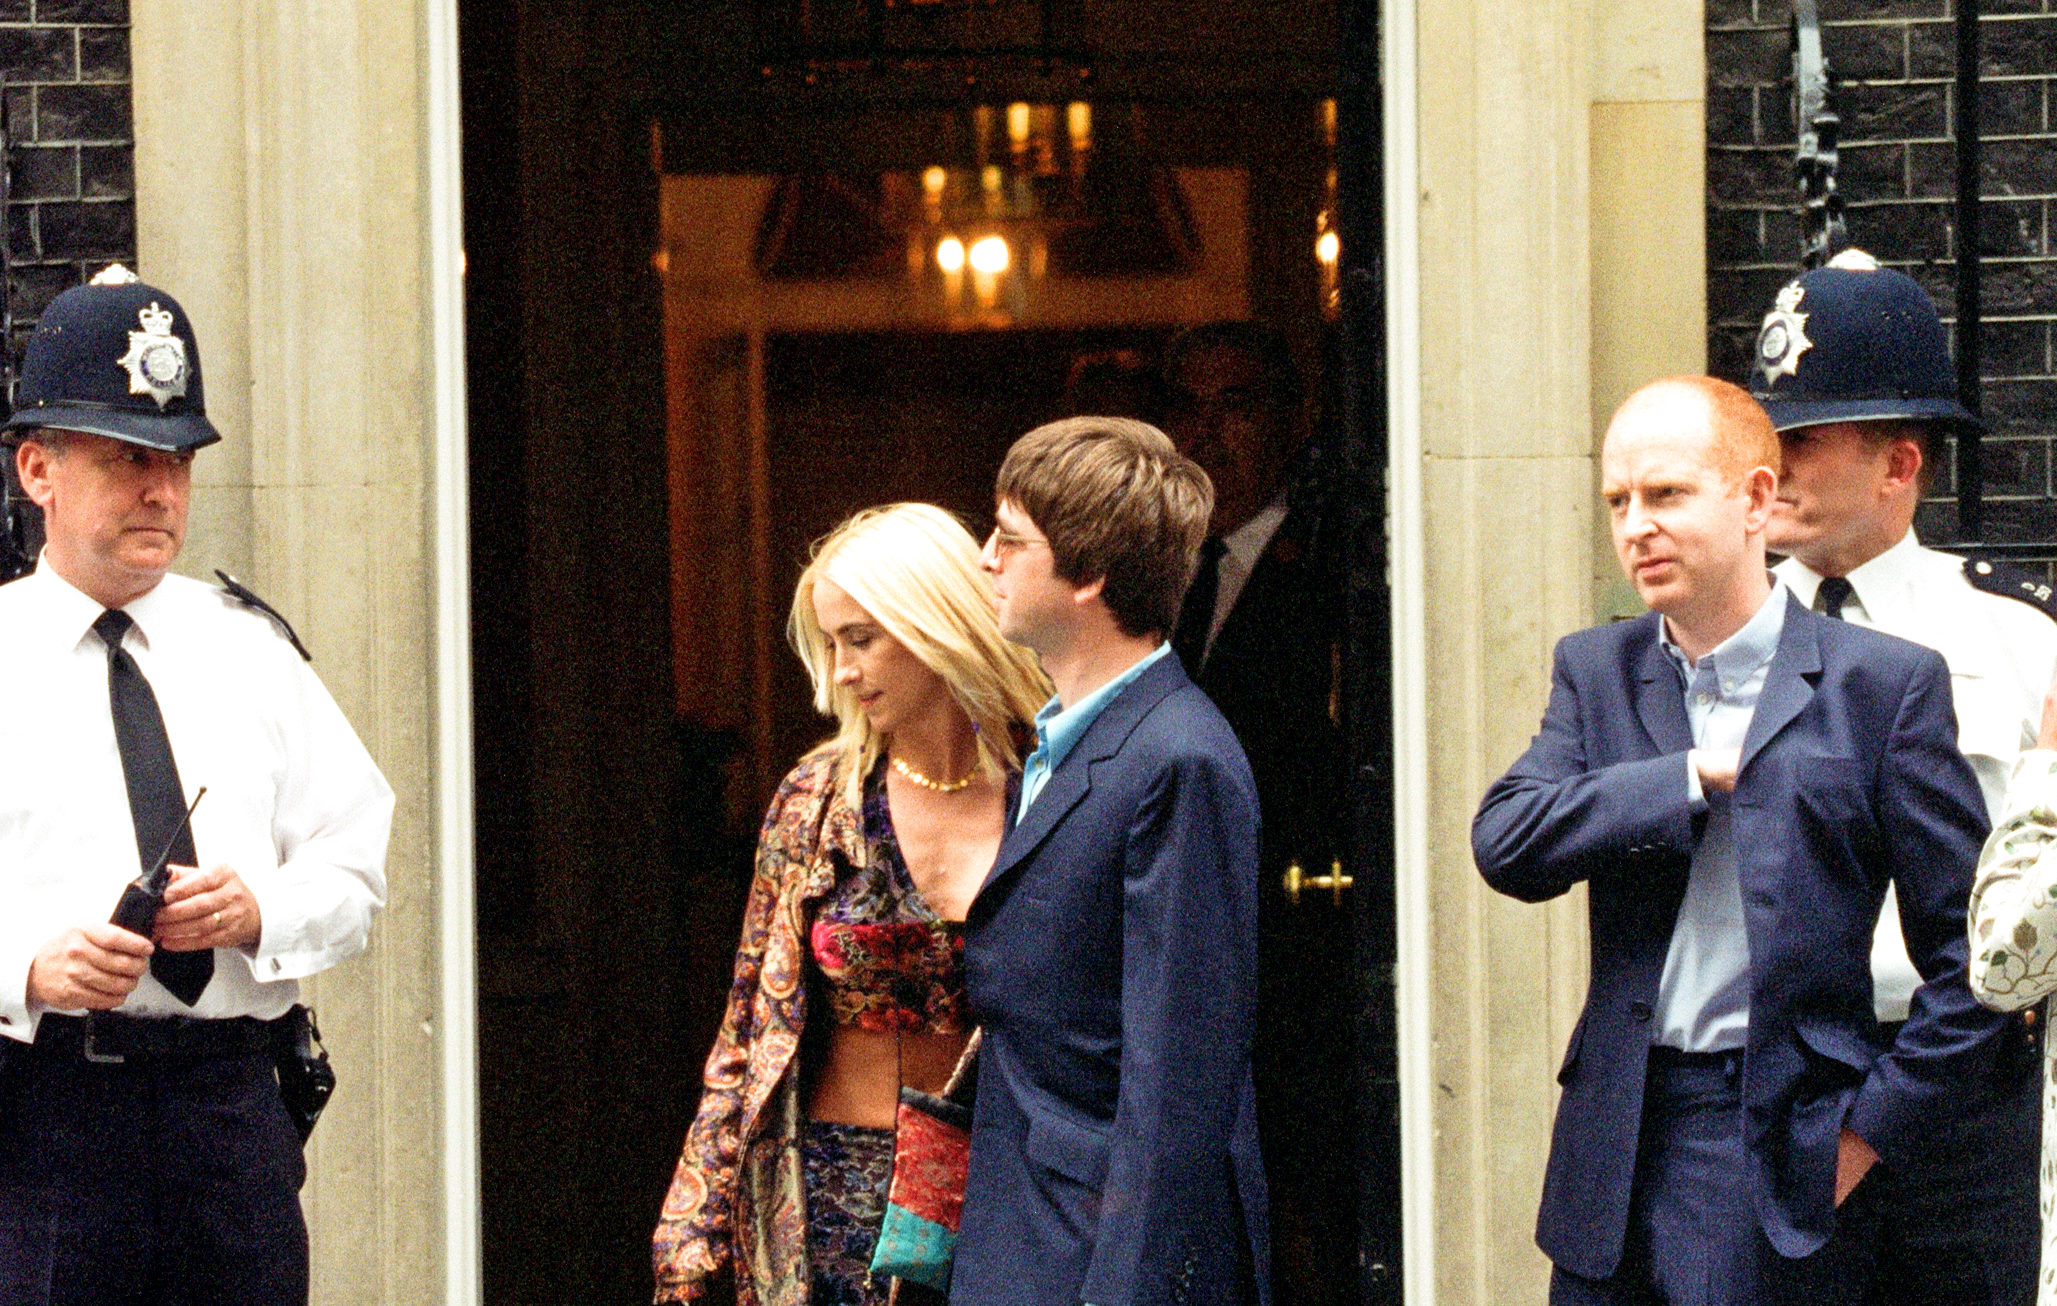 Alan McGee, on right, with Noel Gallagher and Meg Matthews arriving in Downing Street on July 30, 1997